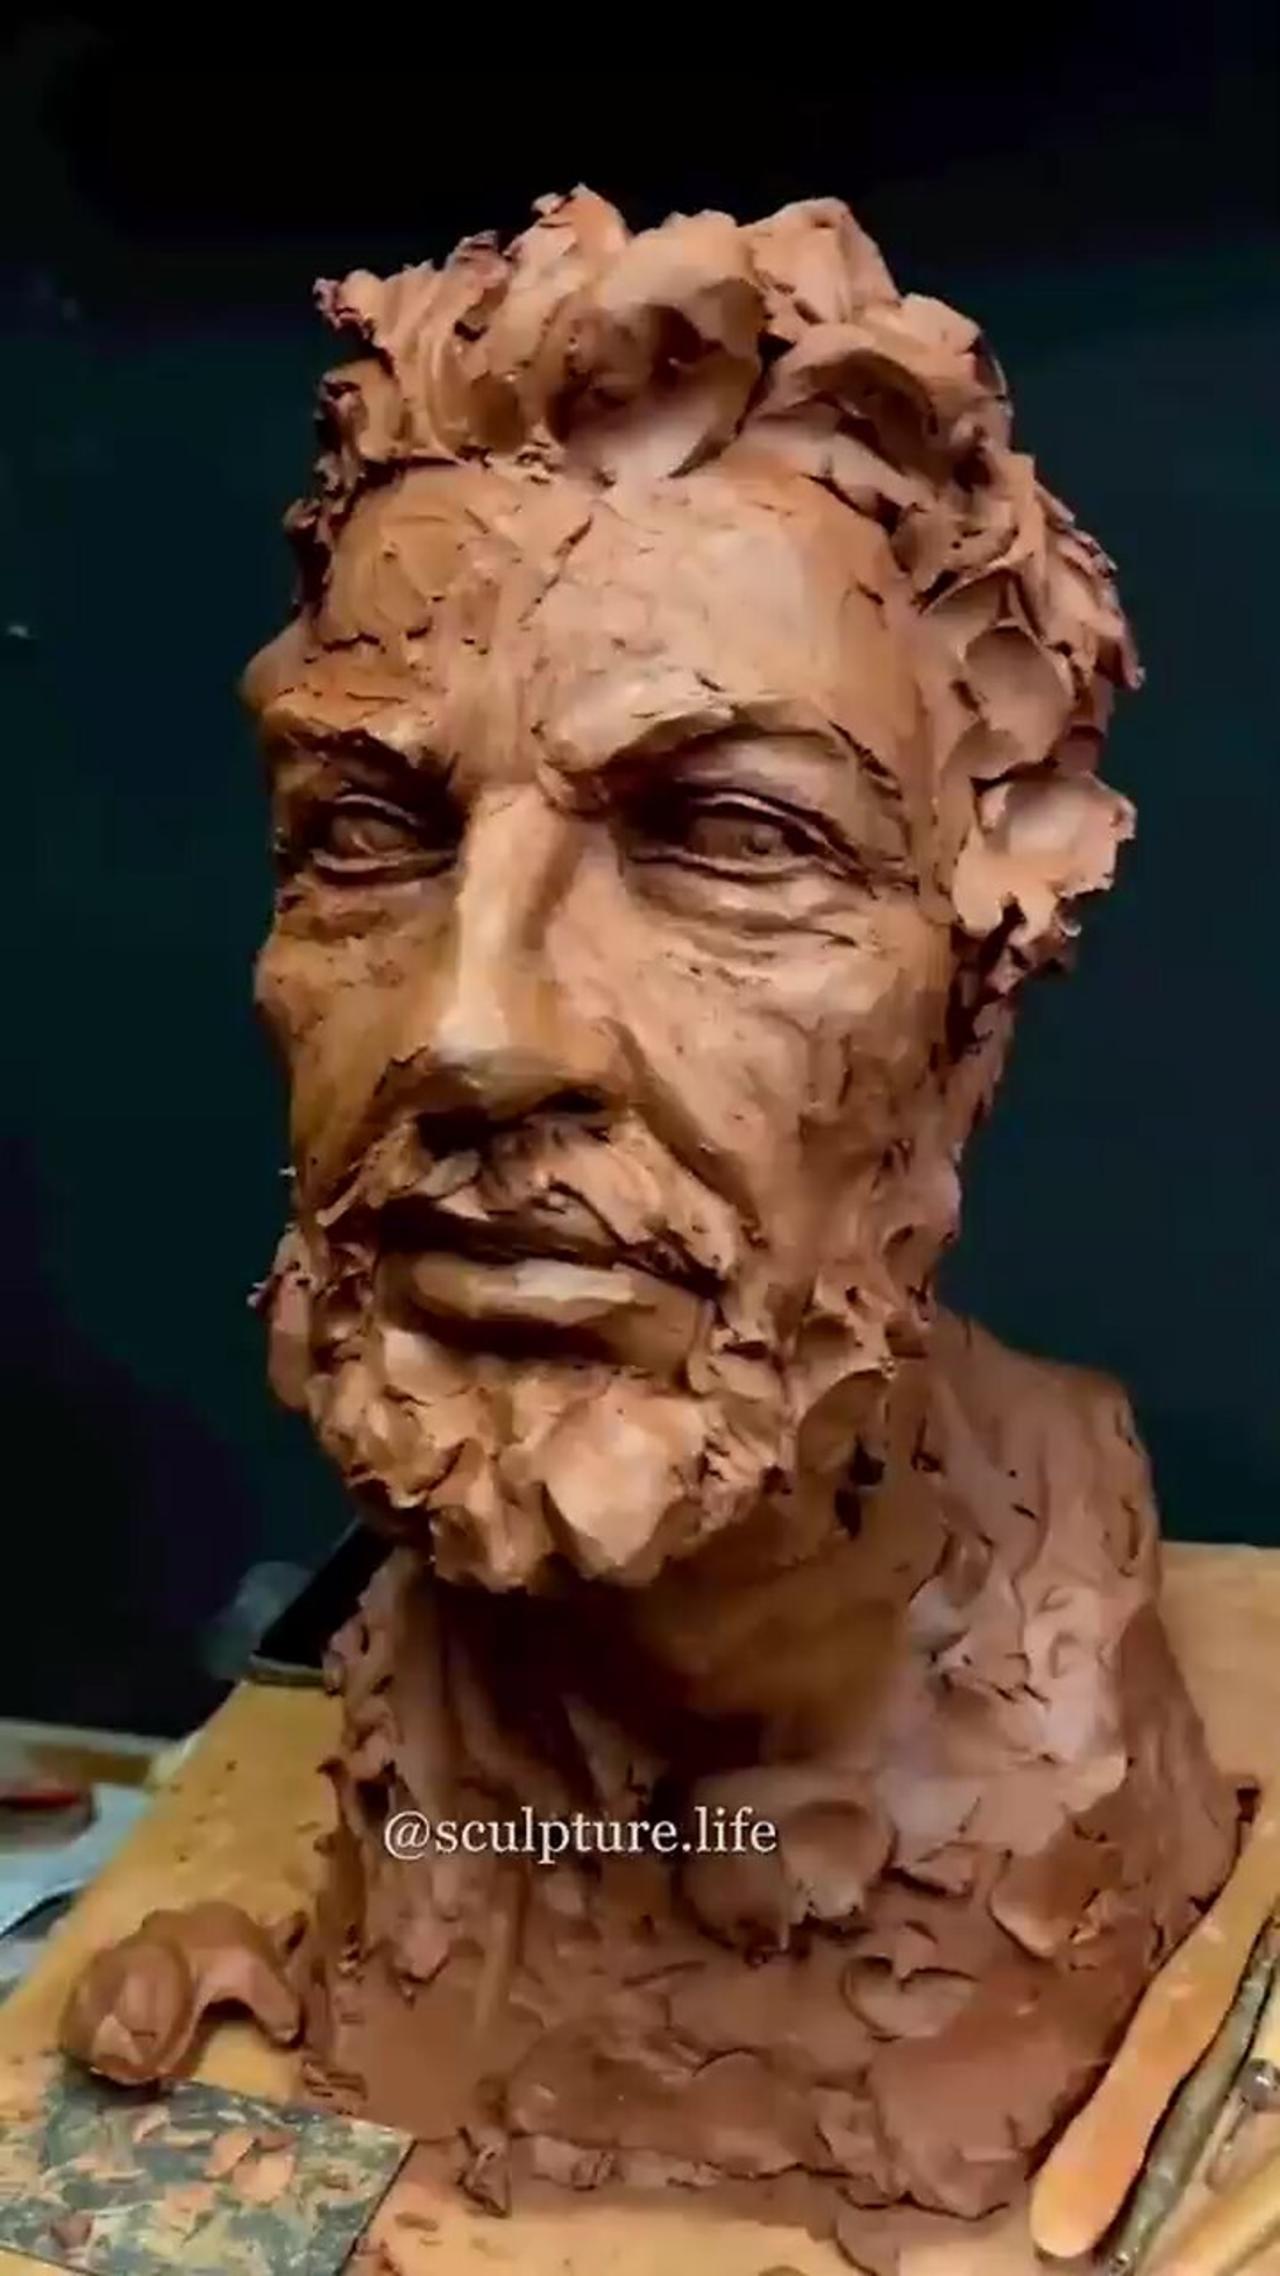 Awesome artist doing Satisfying